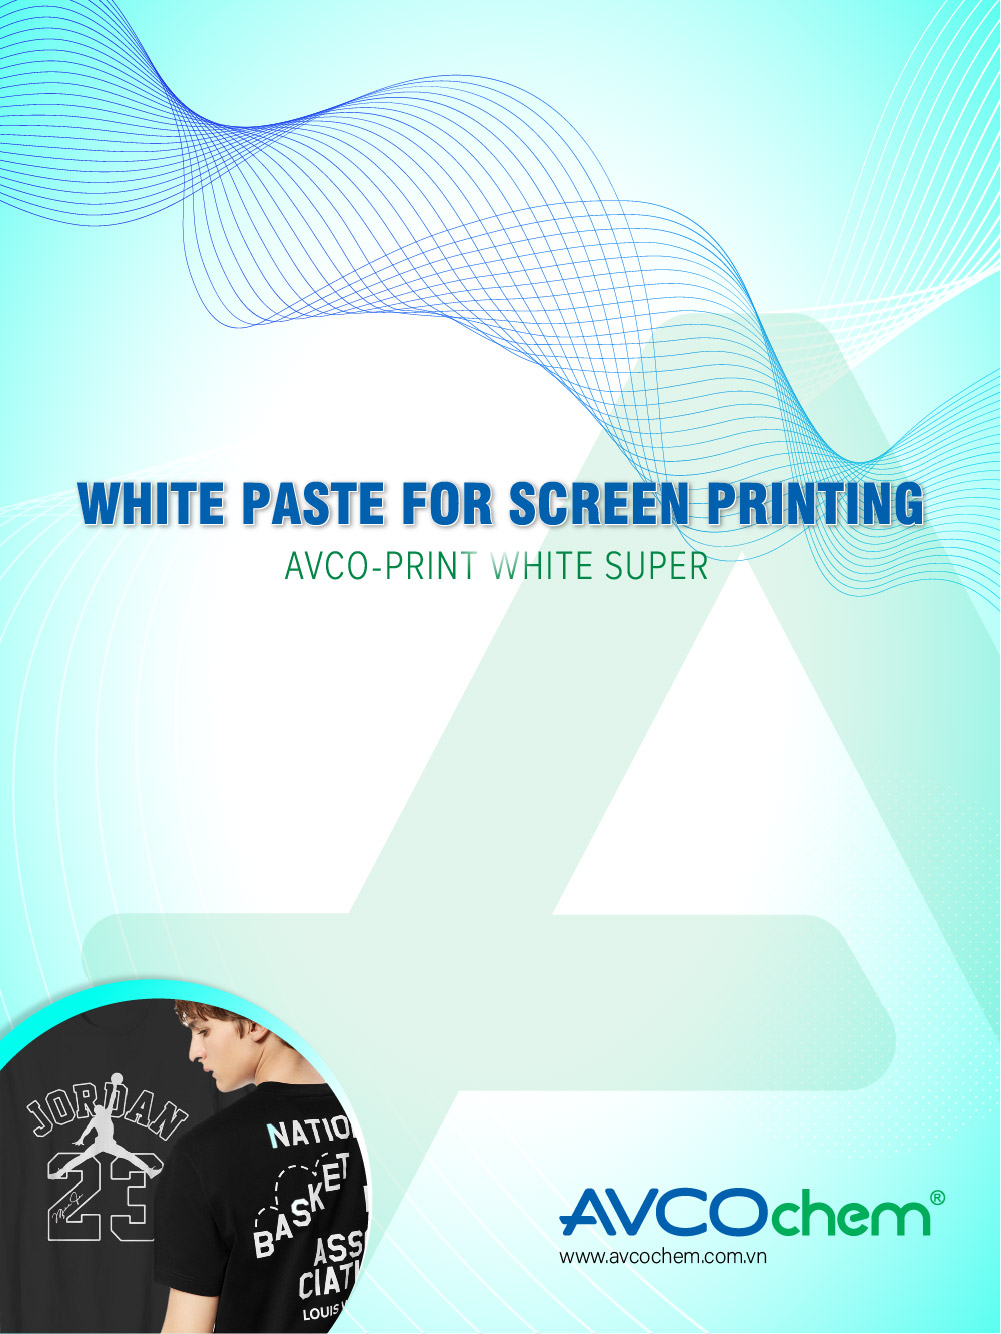 WHITE PASTE FOR SCREEN PRINTING